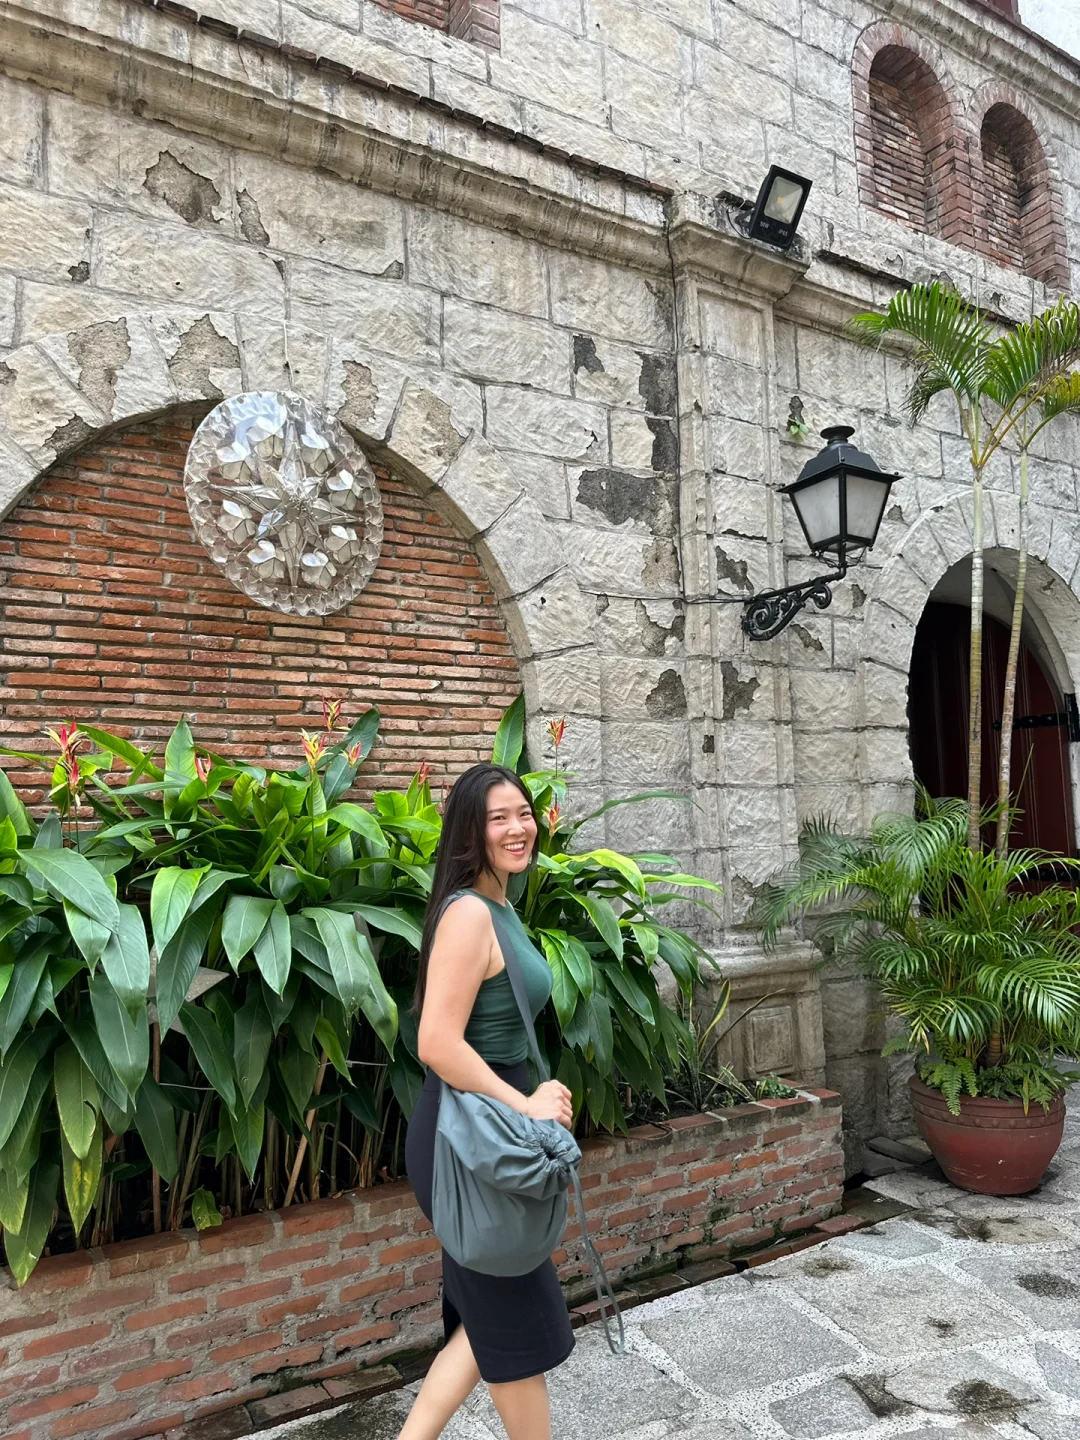 Manila/Luzon-Intramuros, the old town of Manila, a beautiful and dangerous place